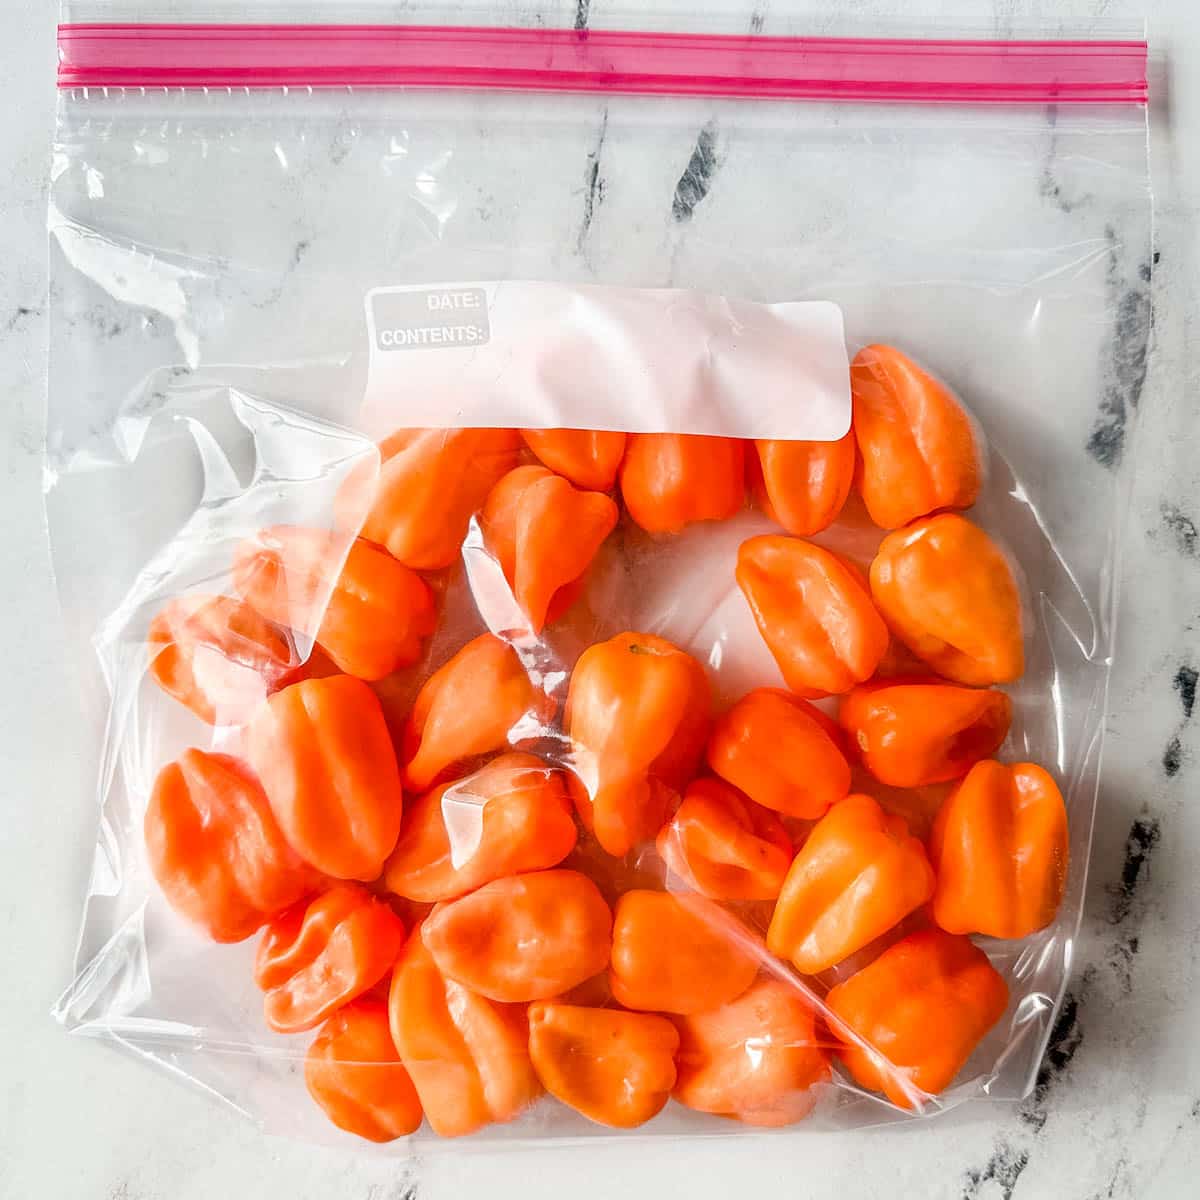 Frozen habanero peppers are shown in a freezer-safe plastic bag.